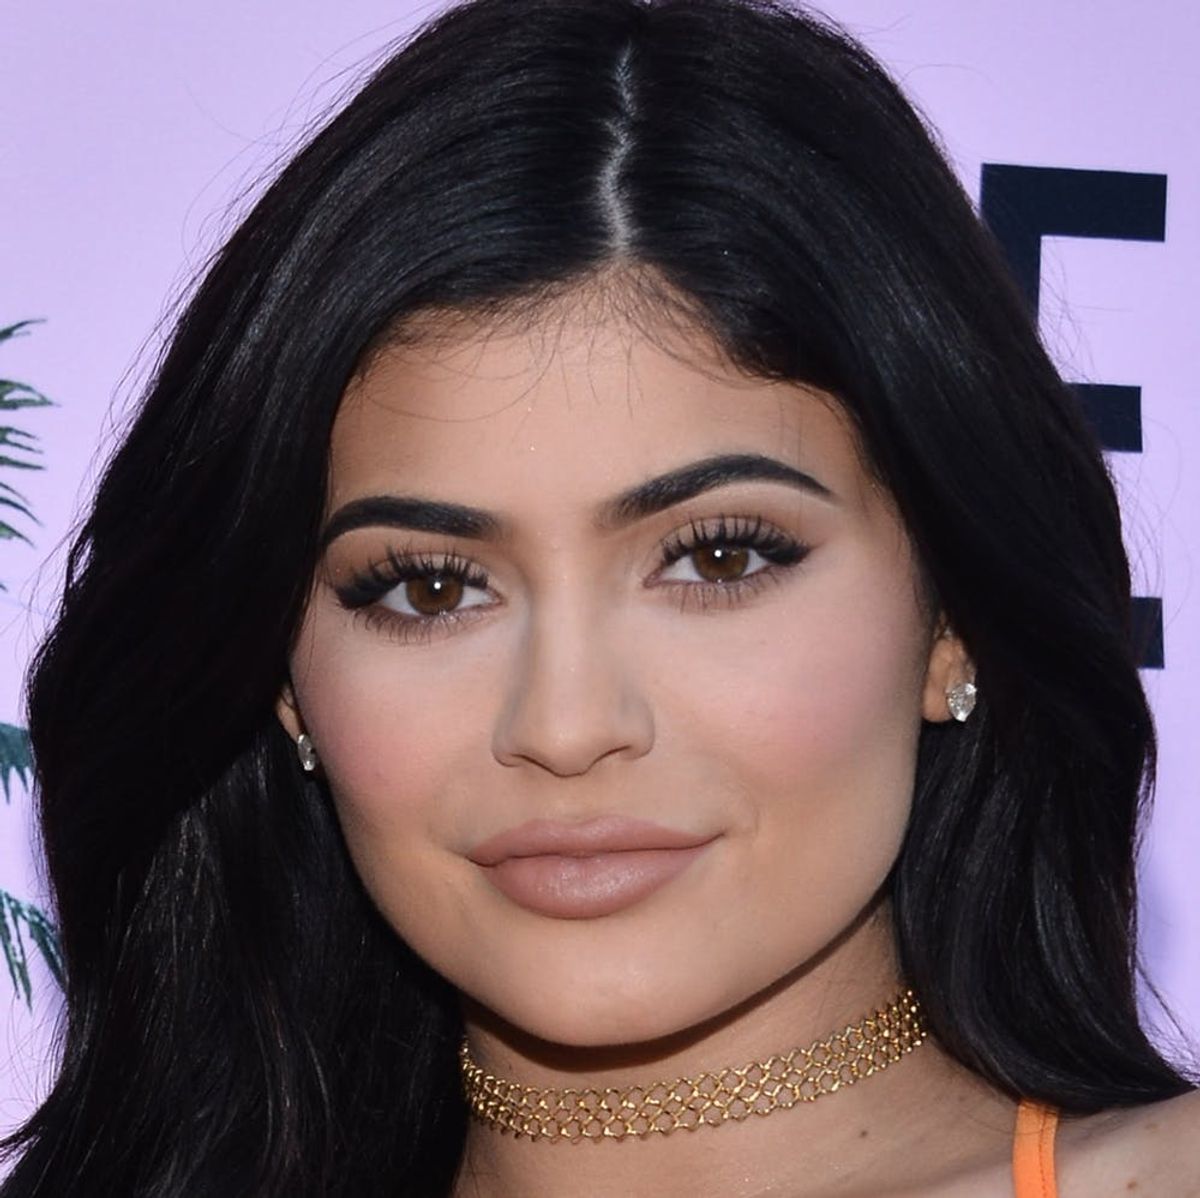 Everything We Know About the Kylie Jenner Engagement Rumors